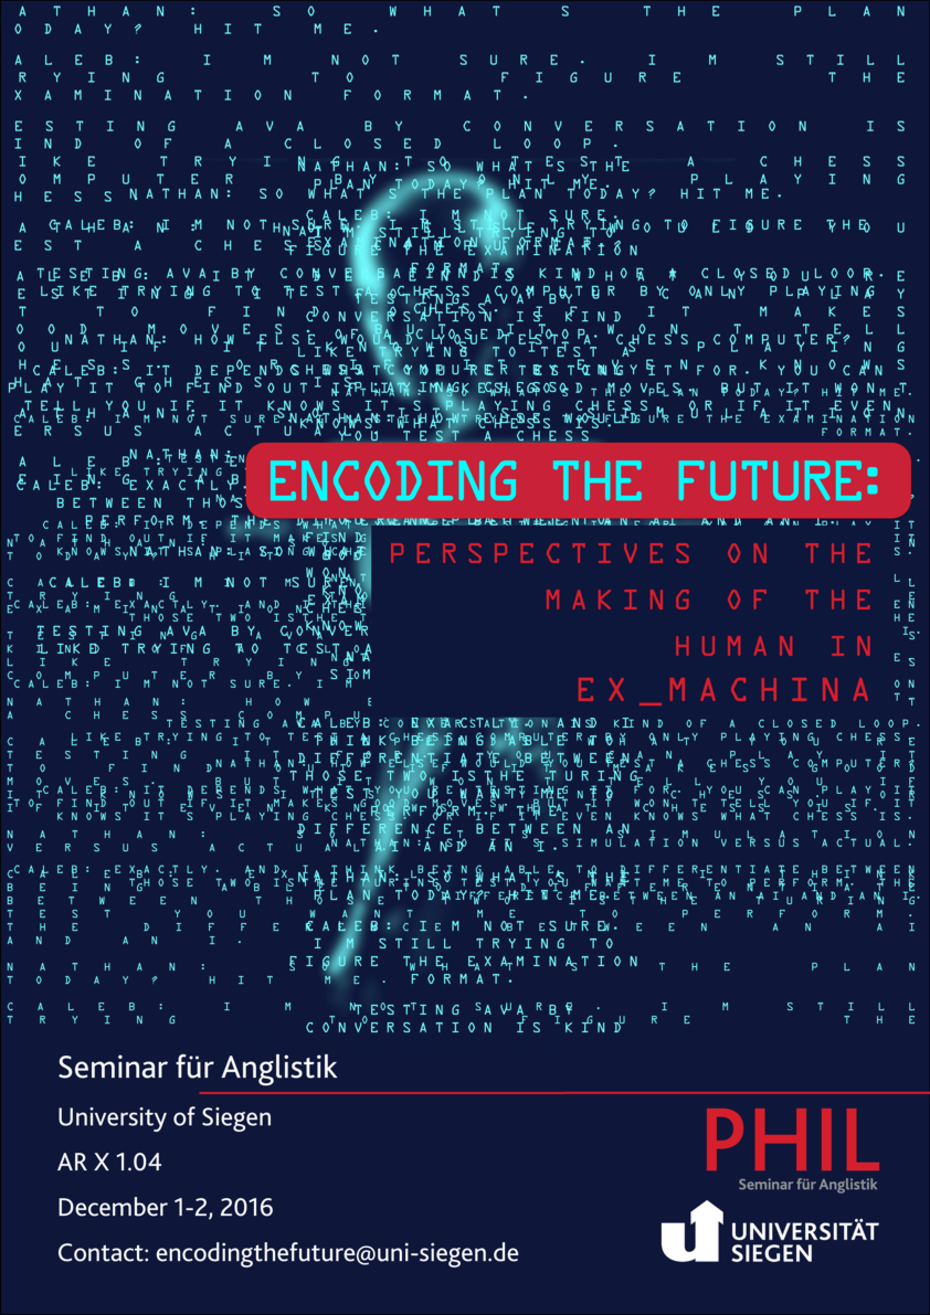 Encoding the Future: Perspectives on the Making of the Human in Ex_Machina